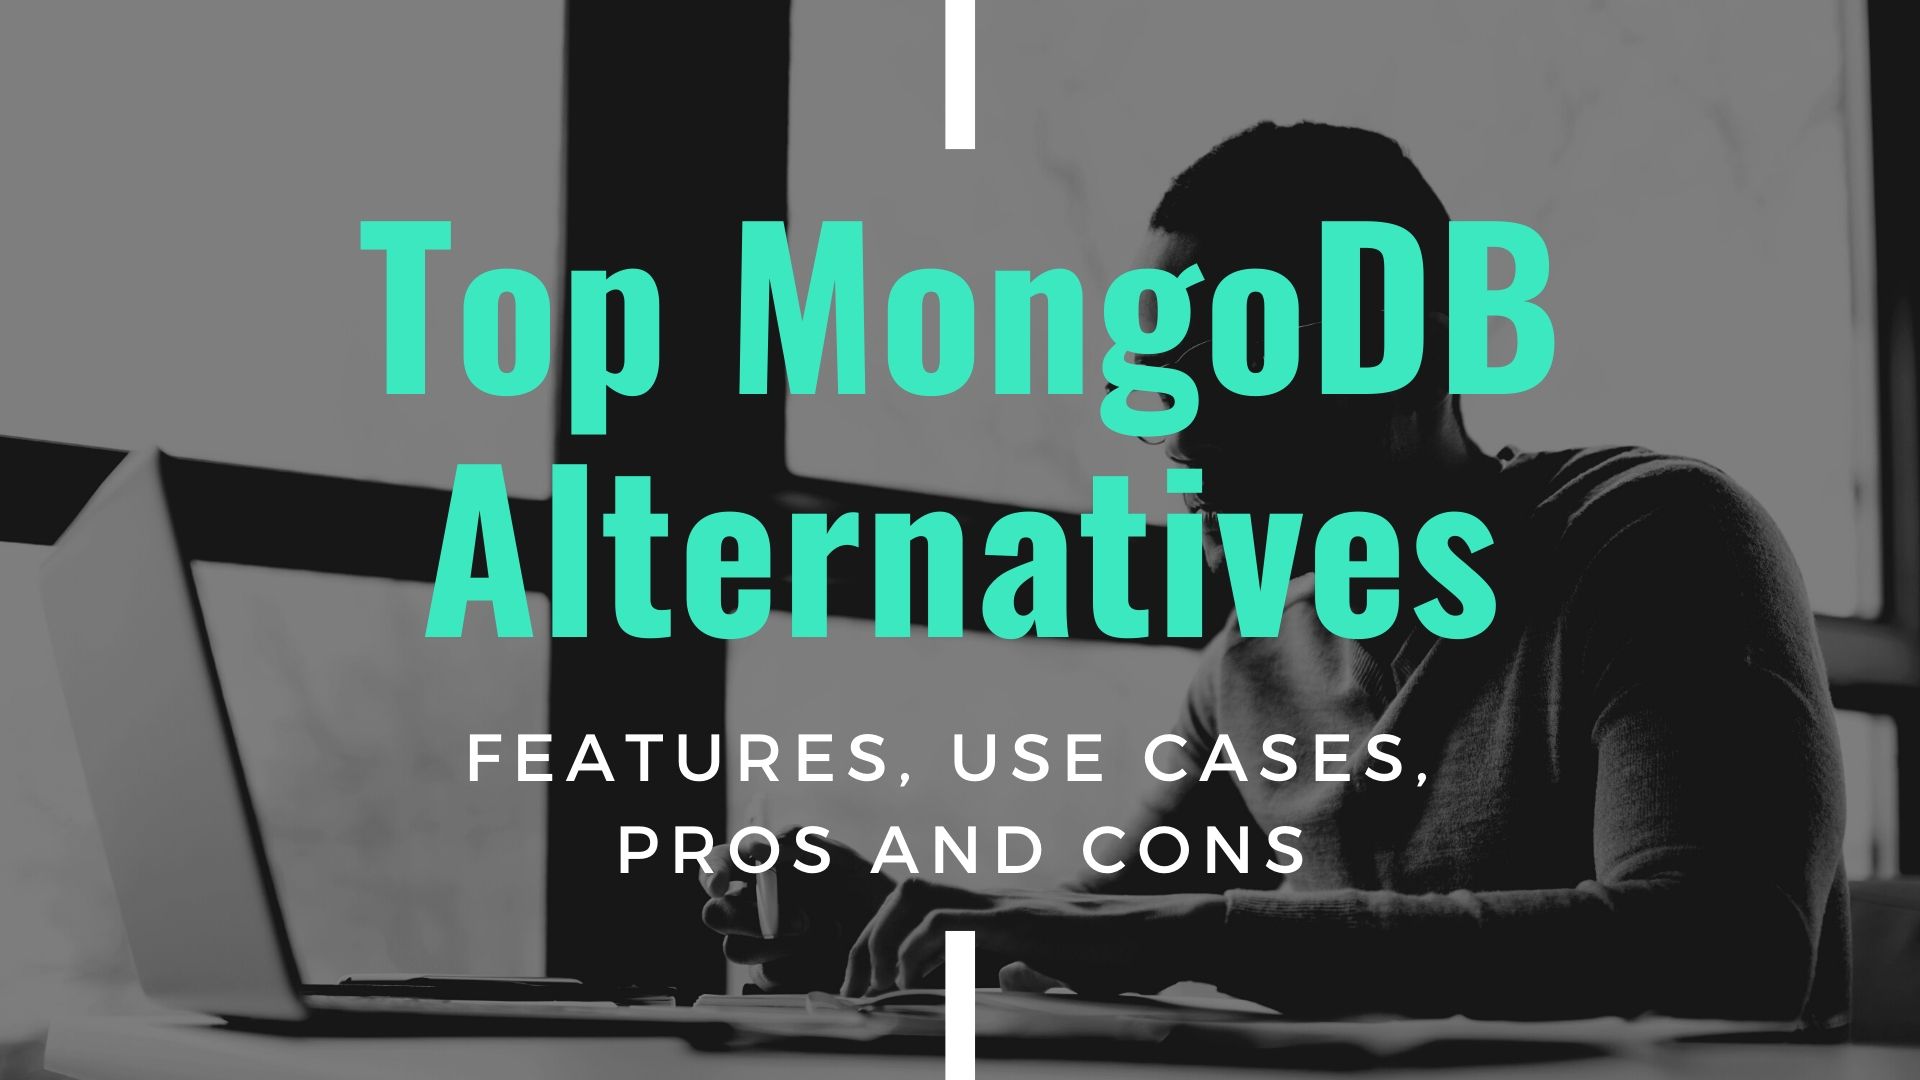 Top MongoDB Alternatives — Features, Use Cases, Pros and Cons